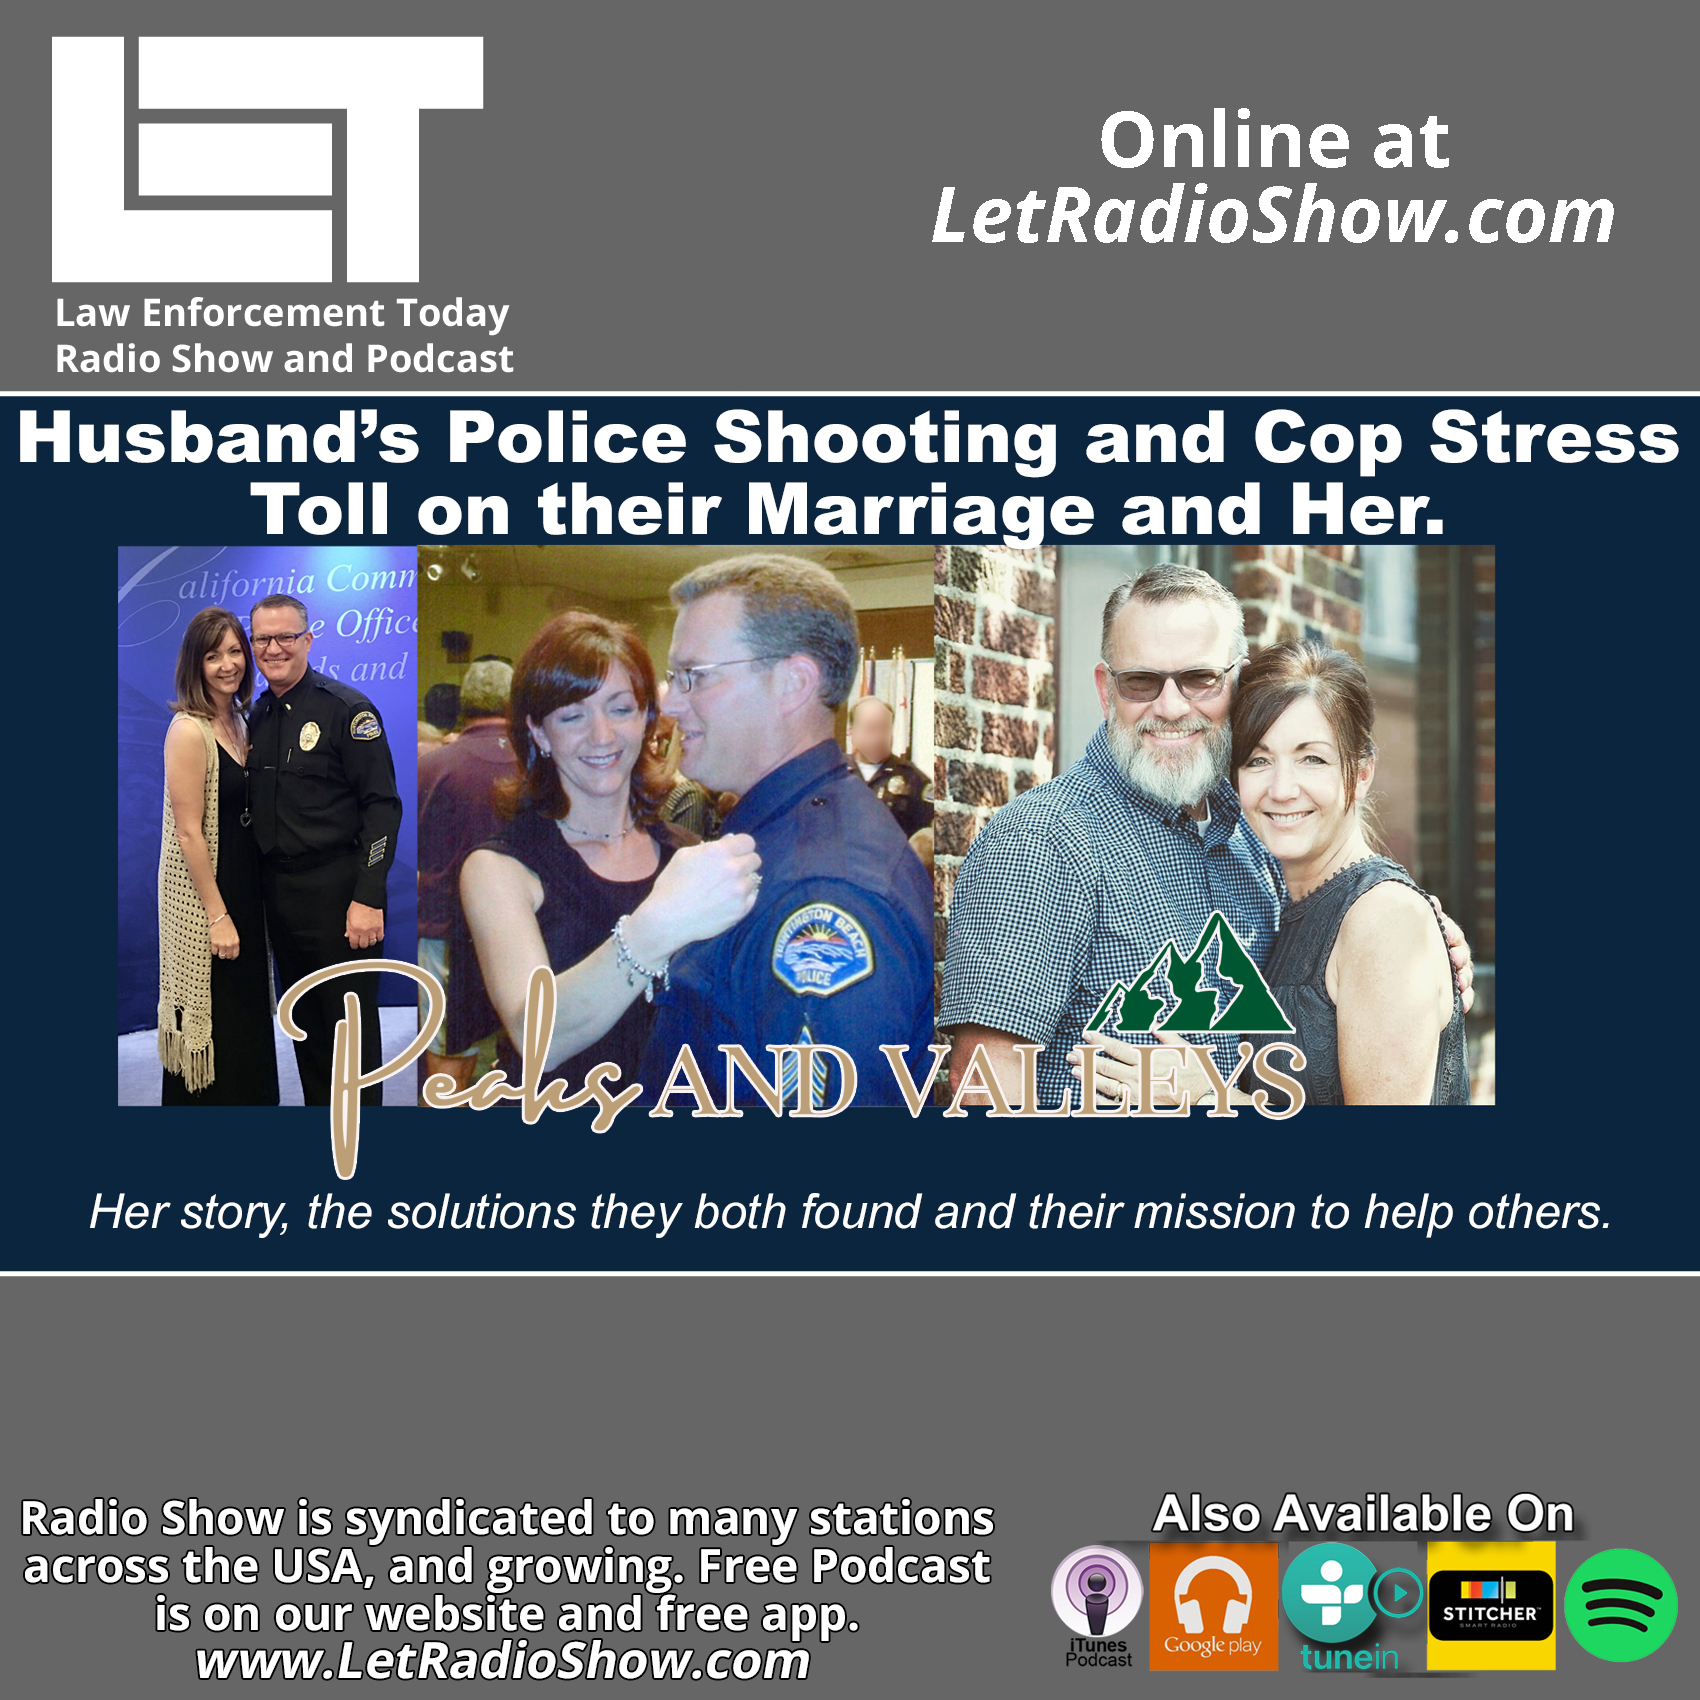 Police Officer's Shooting and Career. Toll on their Marriage and Her.